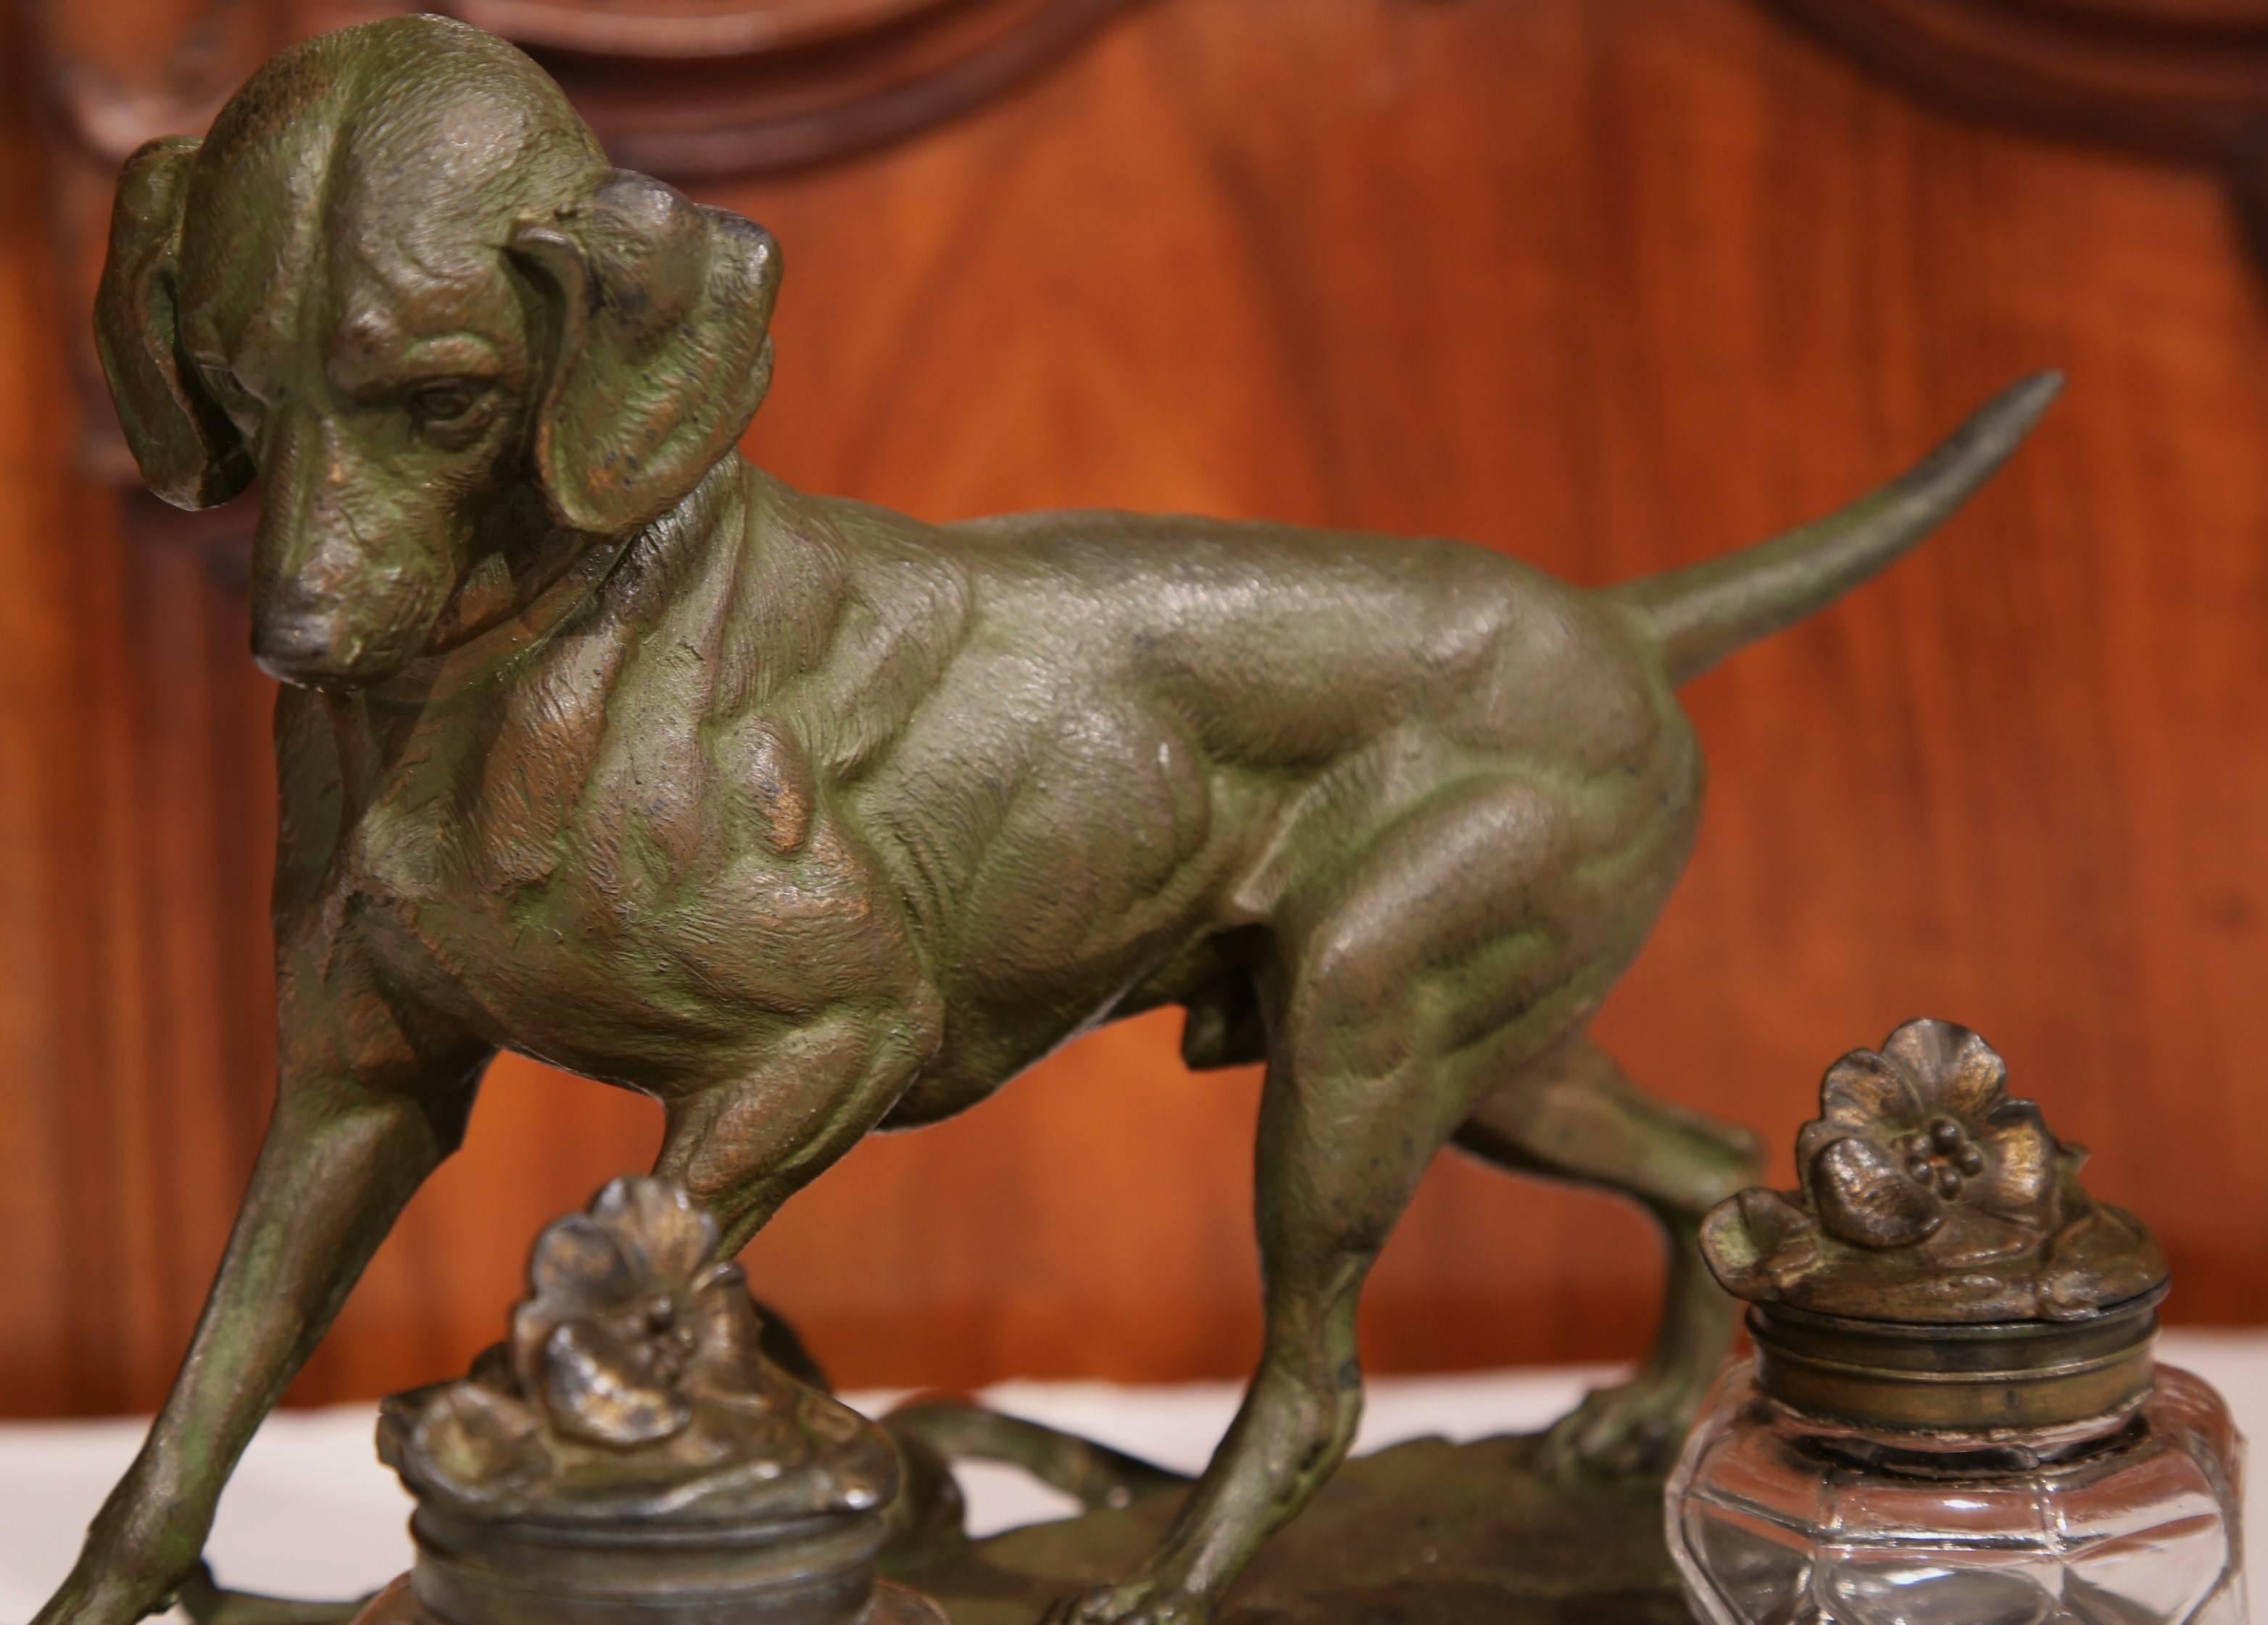 Decorate your desk with this fine, antique inkwell from France, circa 1870. The patinated spelter piece is embellished with a finely sculpted hunting dog, and has two glass ink holders with flower decorated lids. The piece is signed and is in